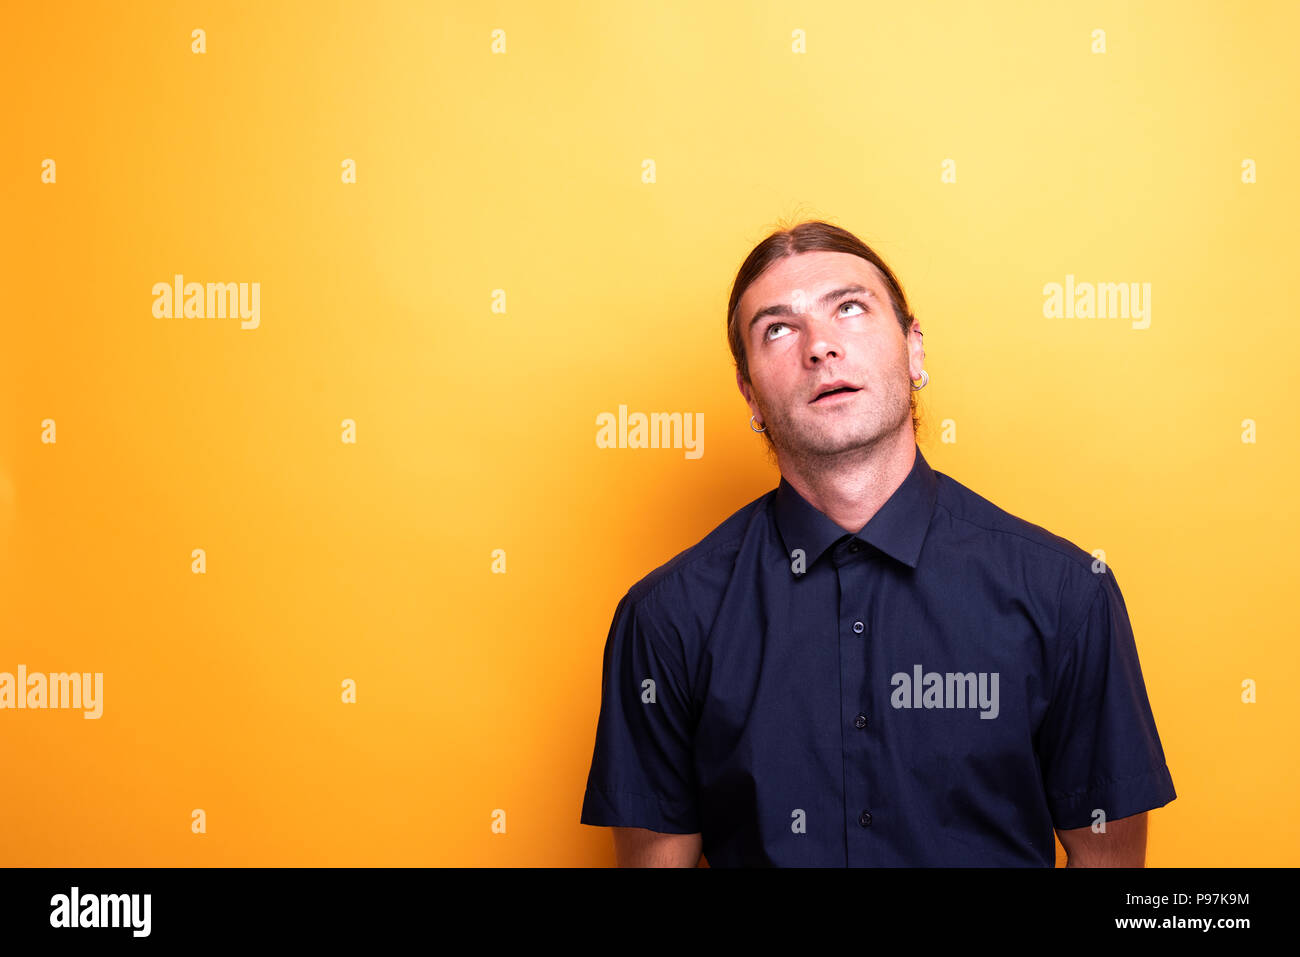 Expressive man looking up contemplative Stock Photo